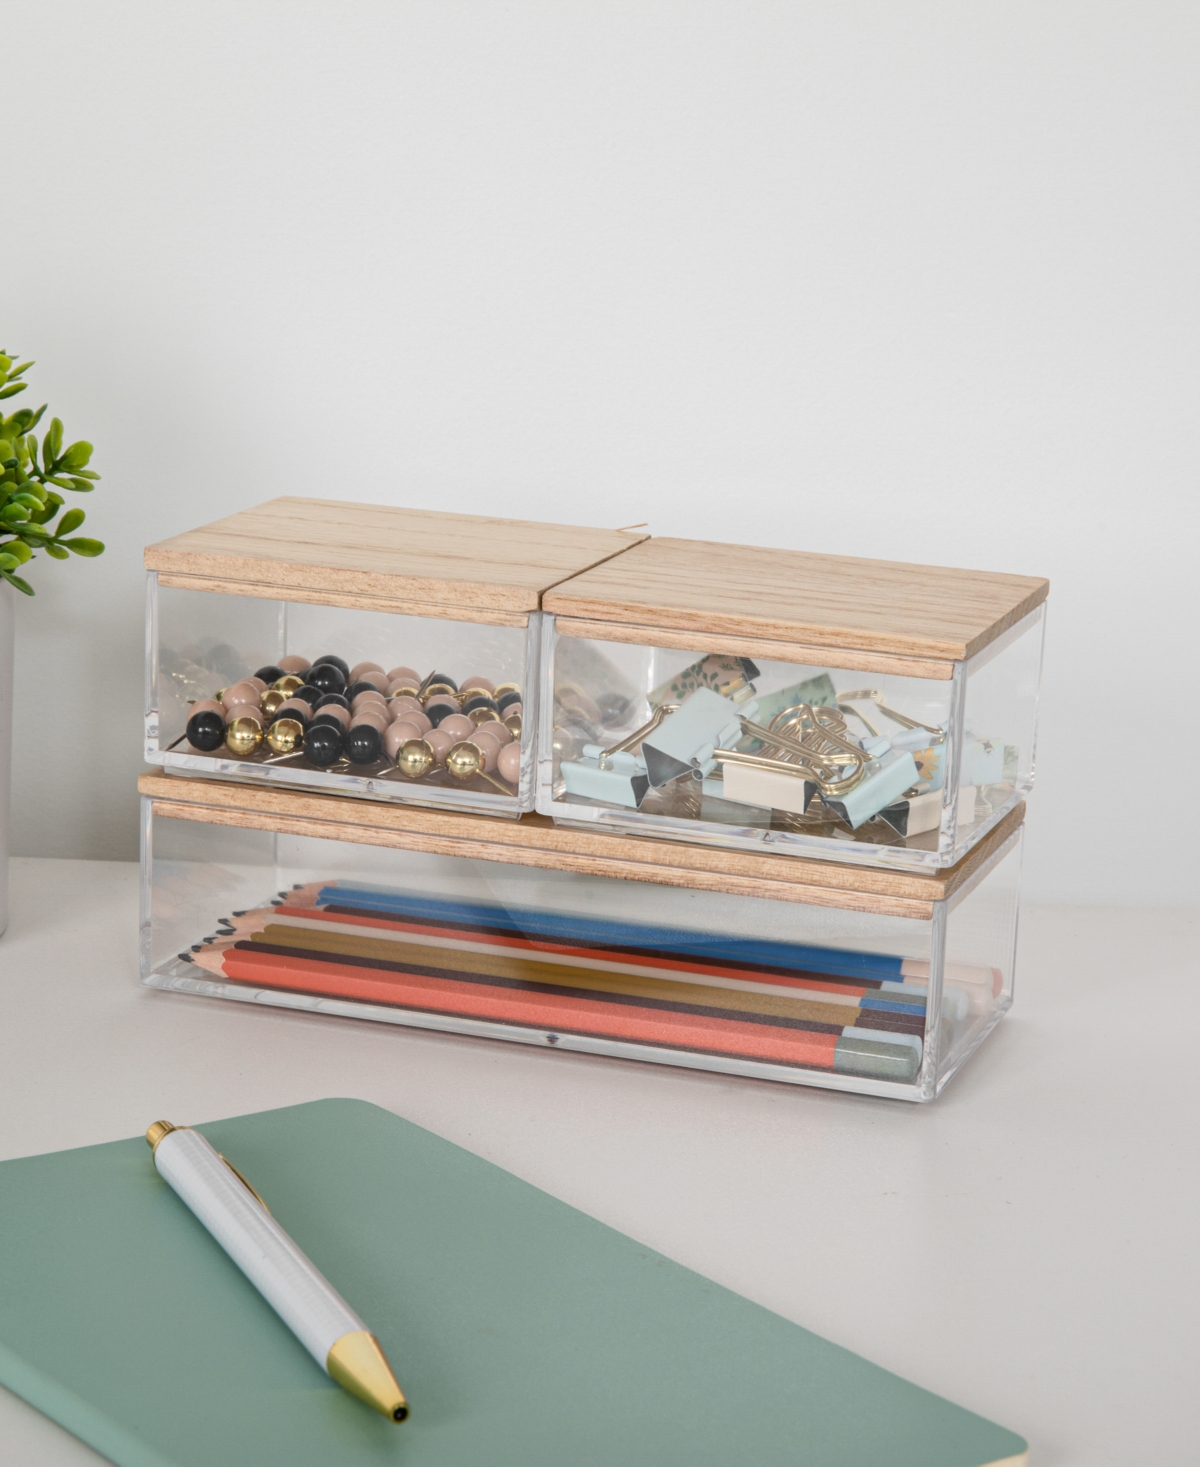 Shop Martha Stewart Brody Plastic Storage Organizer Bins With Paulownia Wood Lids For Home Office, Kitchen, Or Bathroom, In Clear,light Natural